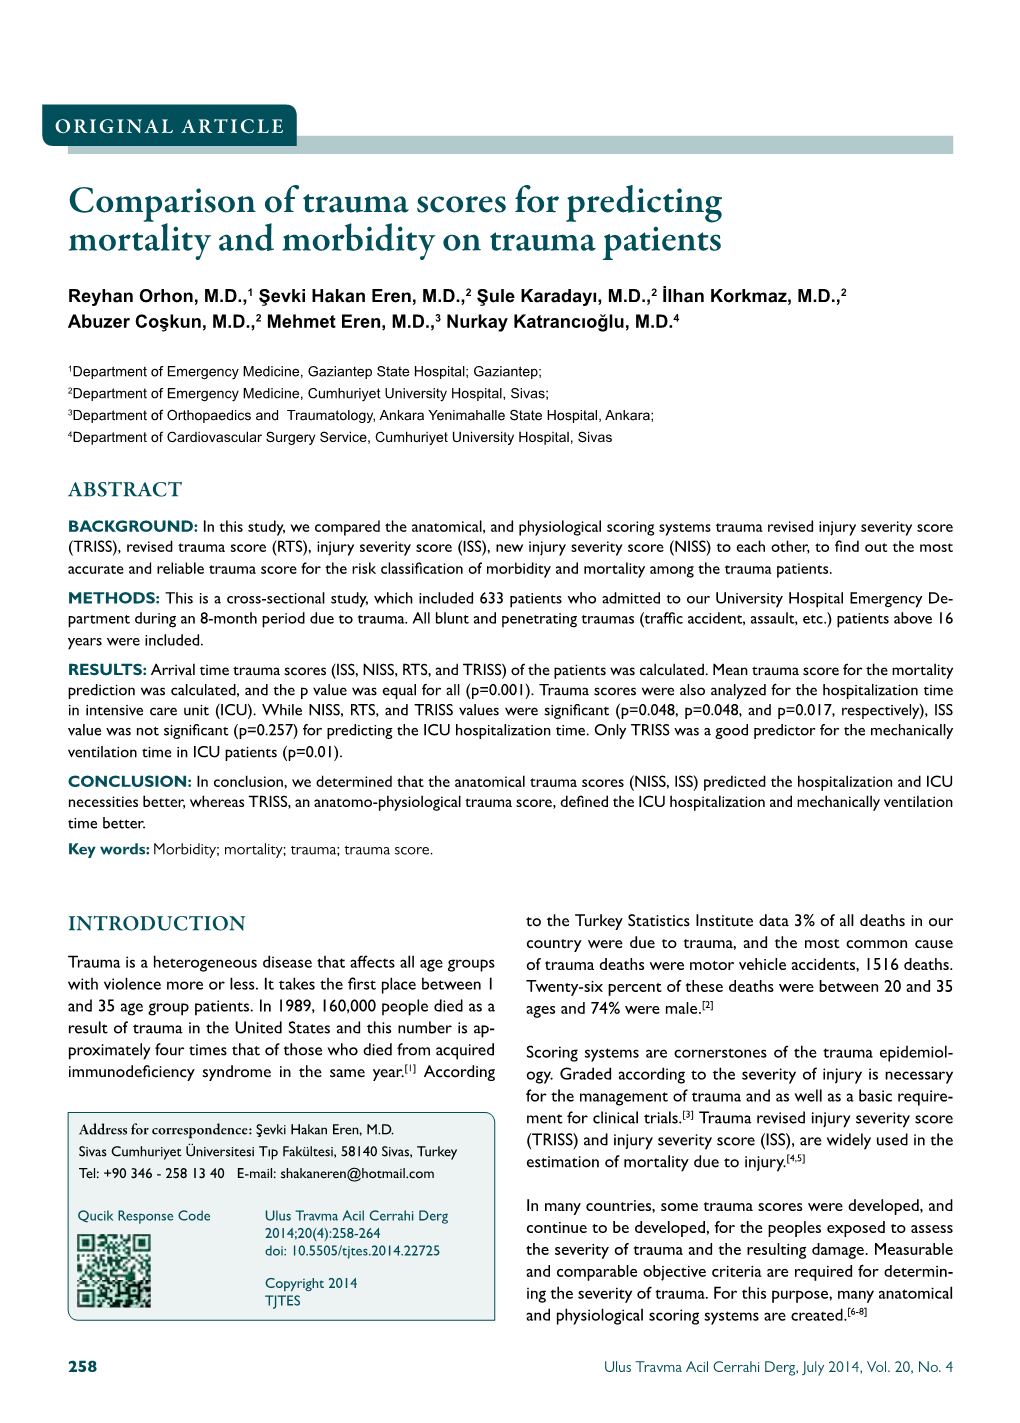 Comparison of Trauma Scores for Predicting Mortality and Morbidity on Trauma Patients